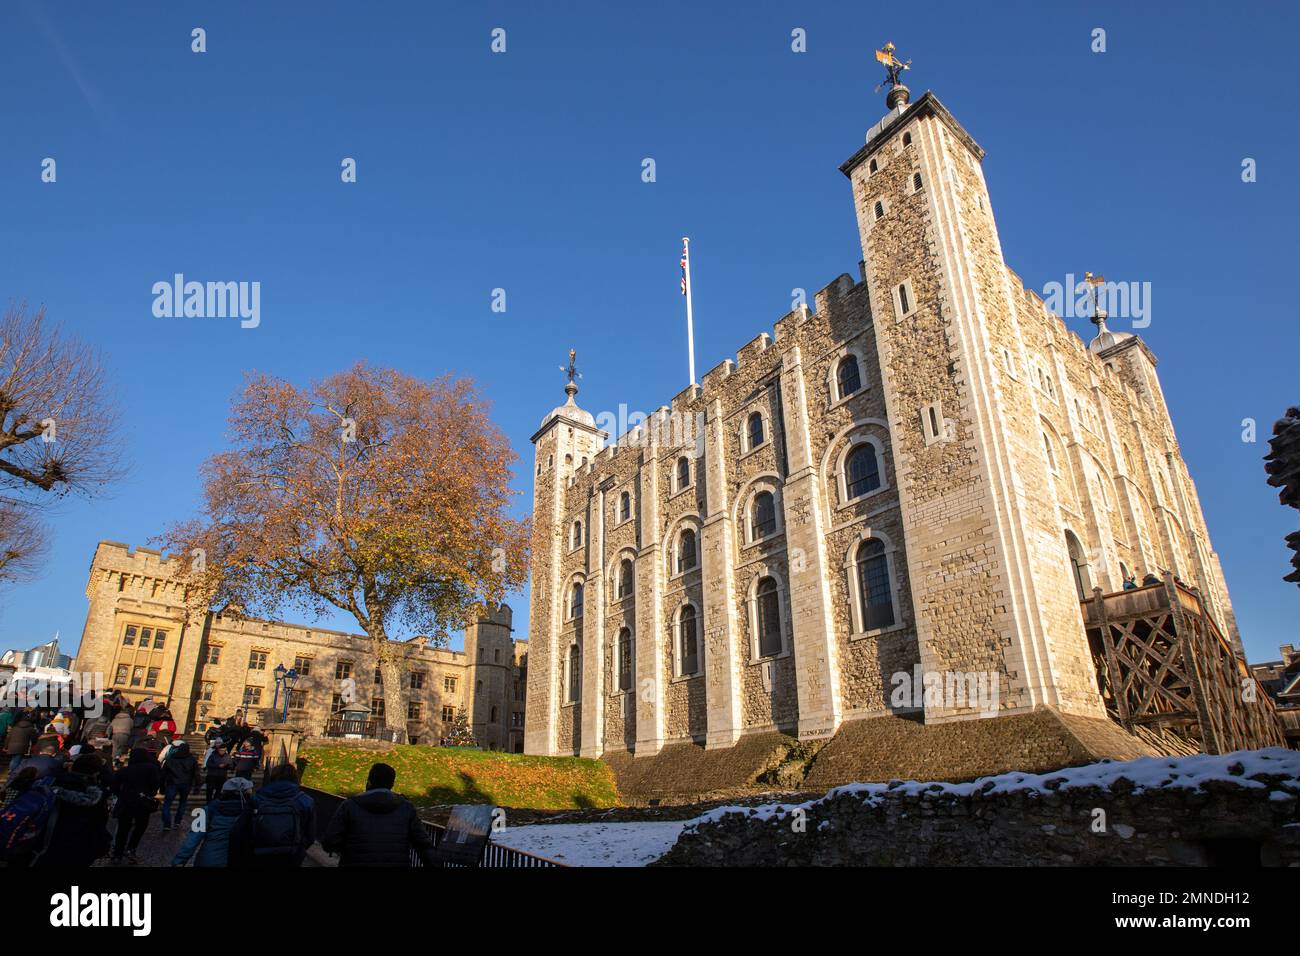 Tower of London, the White Tower, London, England,UK Stock Photo